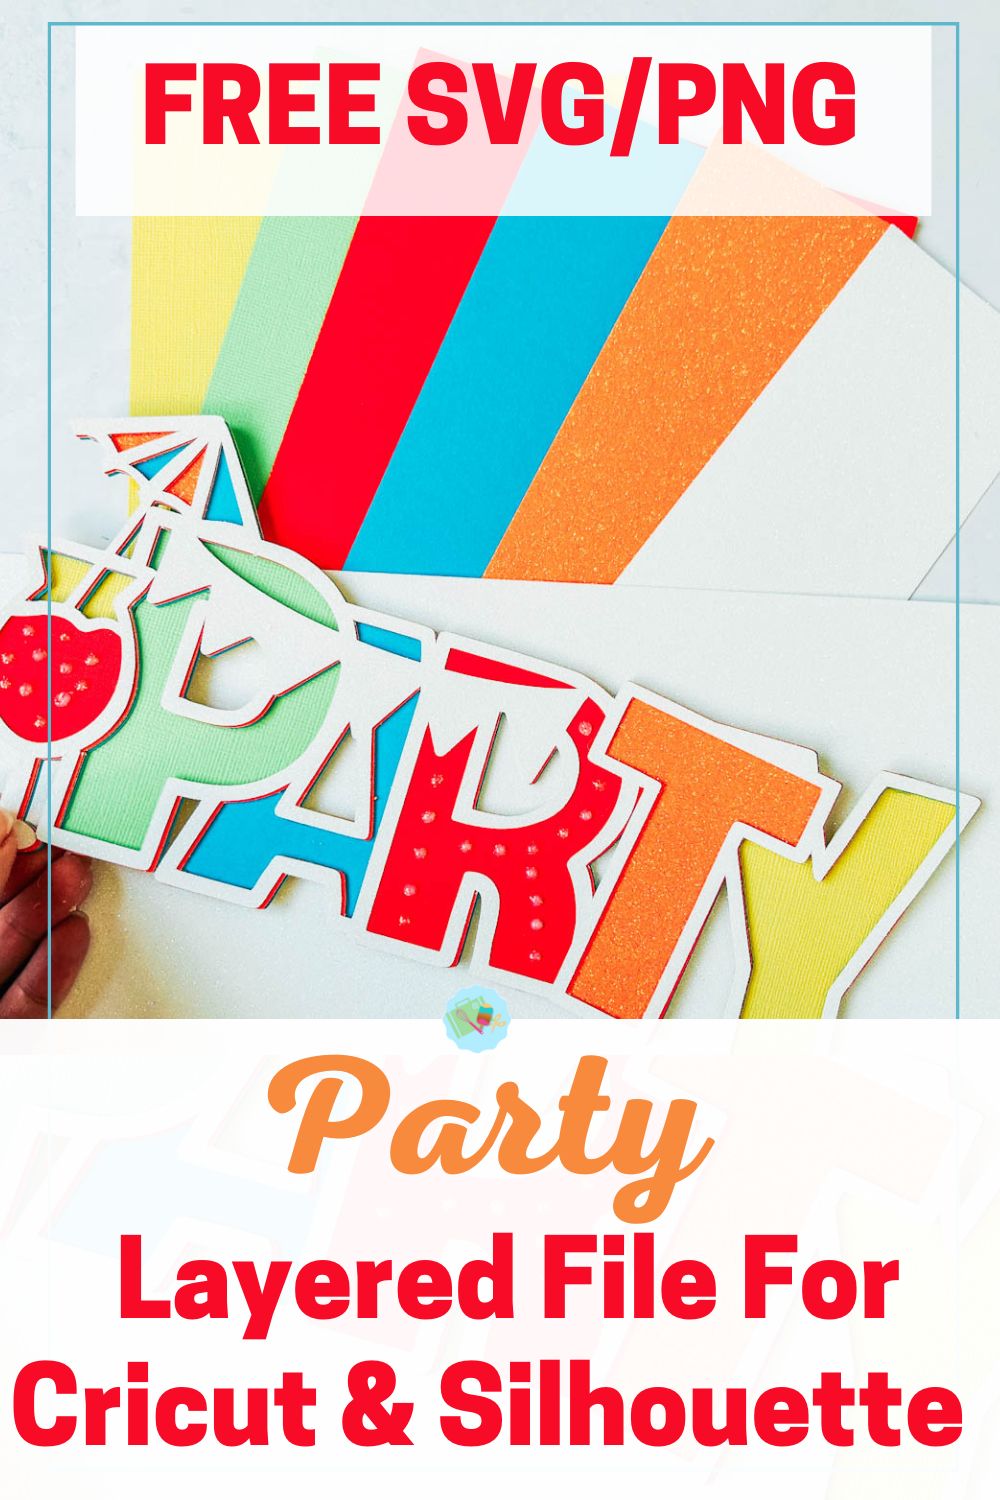 Free SVG Png Party Layered Files For Cricut and Silhouette